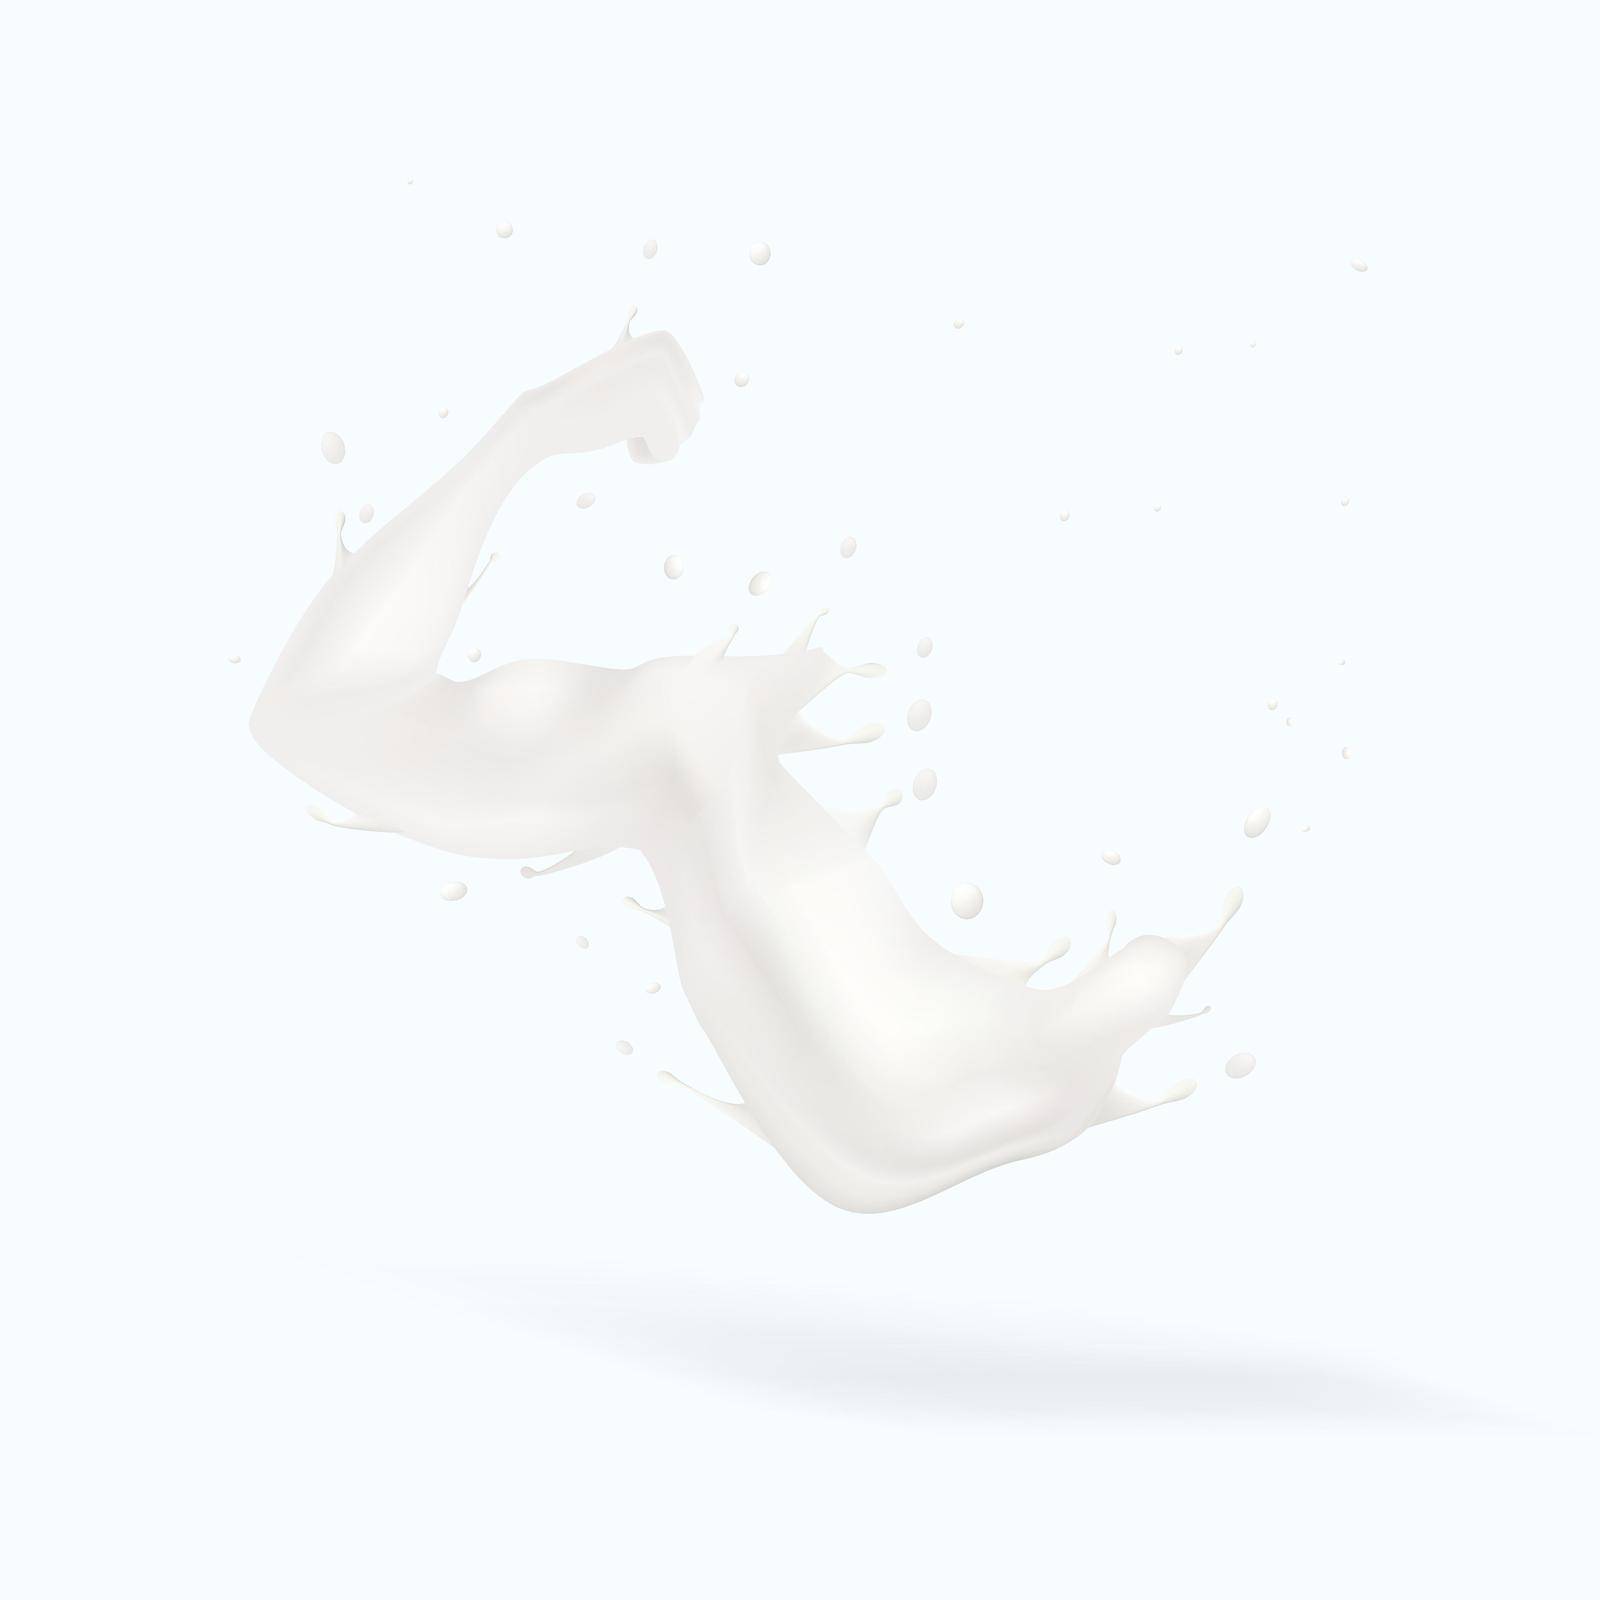 Splash Of Milk In Form Of Strong Arm Concept. EPS10 Vector